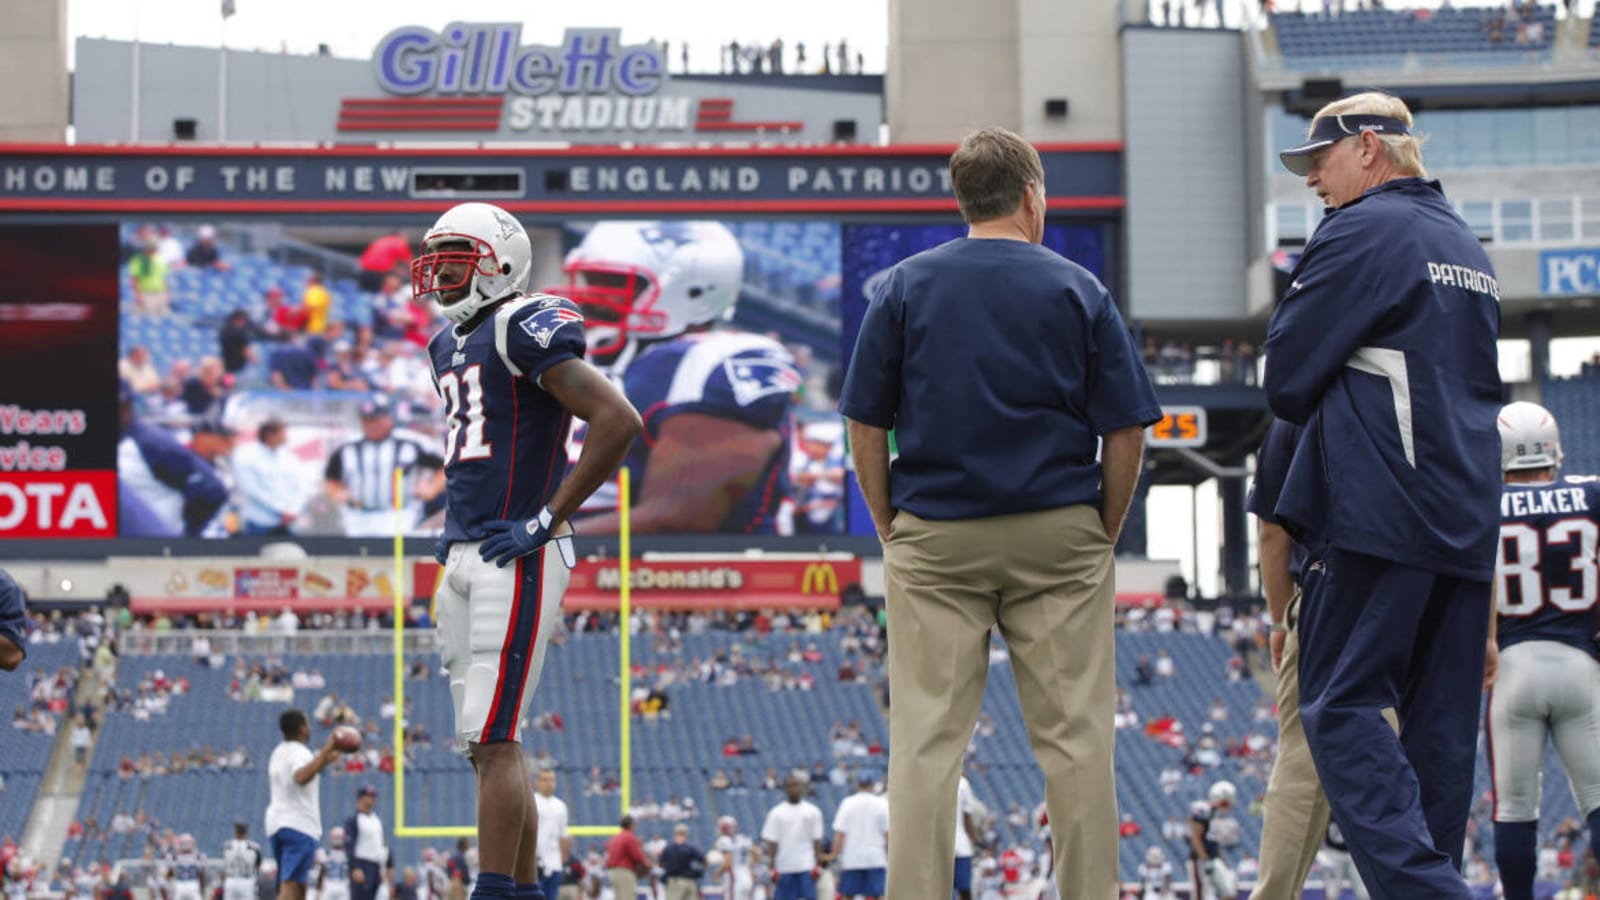 Patriots legend Randy Moss&#39; had hilarious first interaction with Bill Belichick